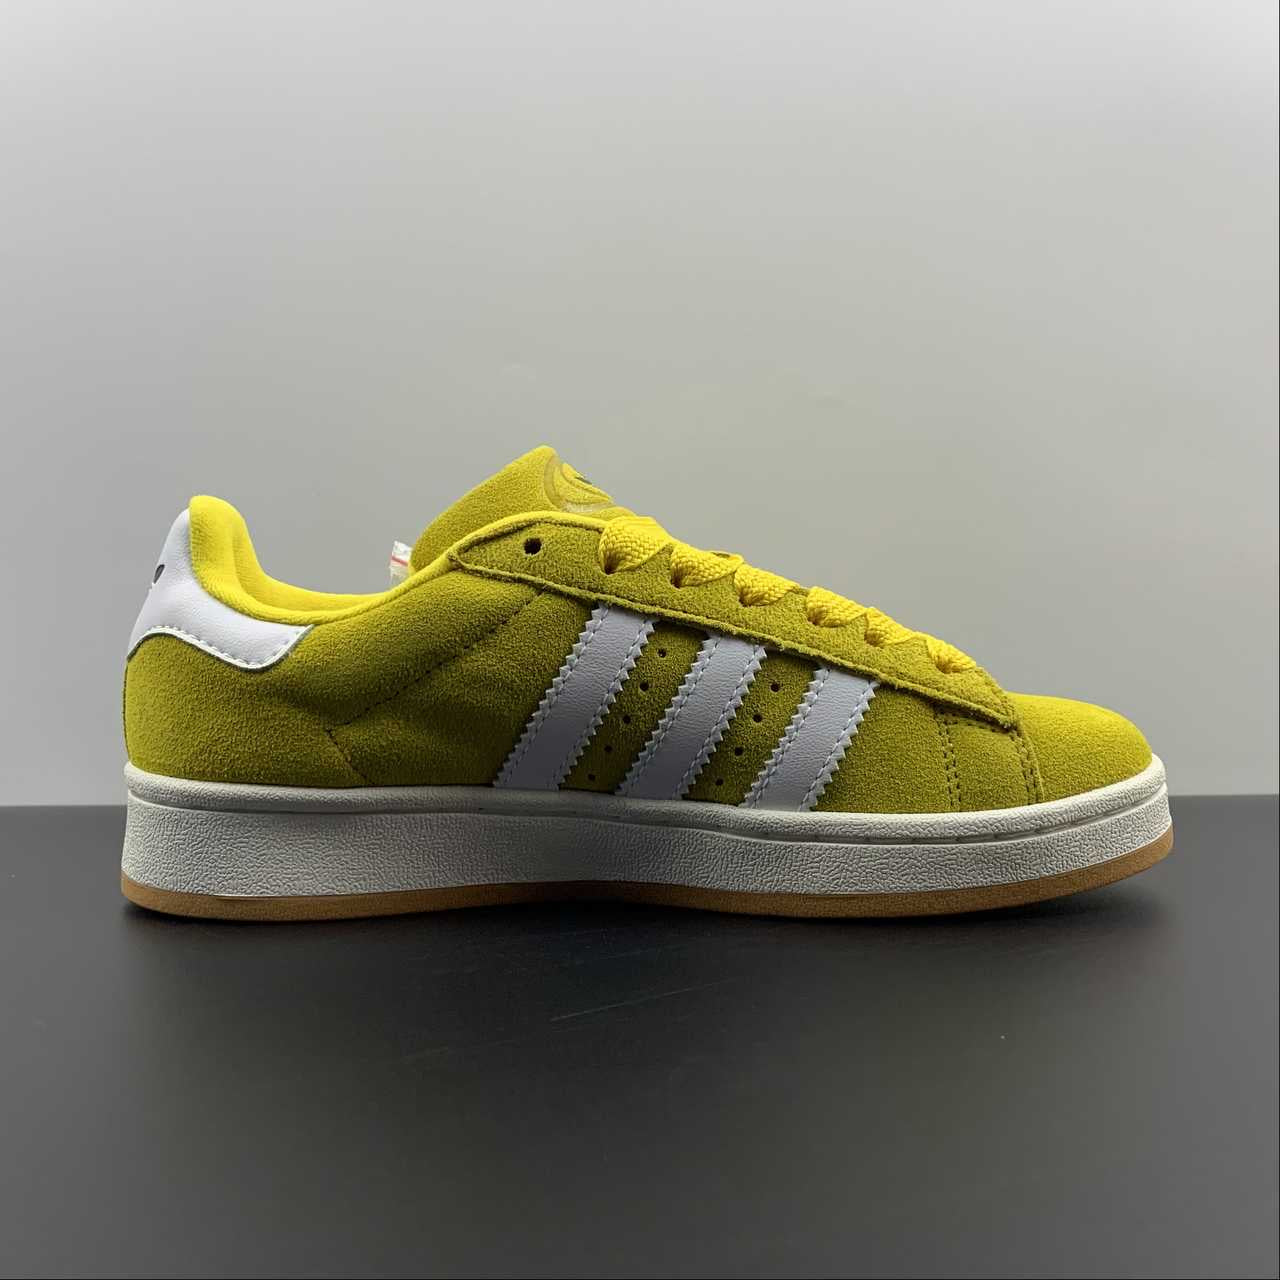 Adidas campus yellow shoes